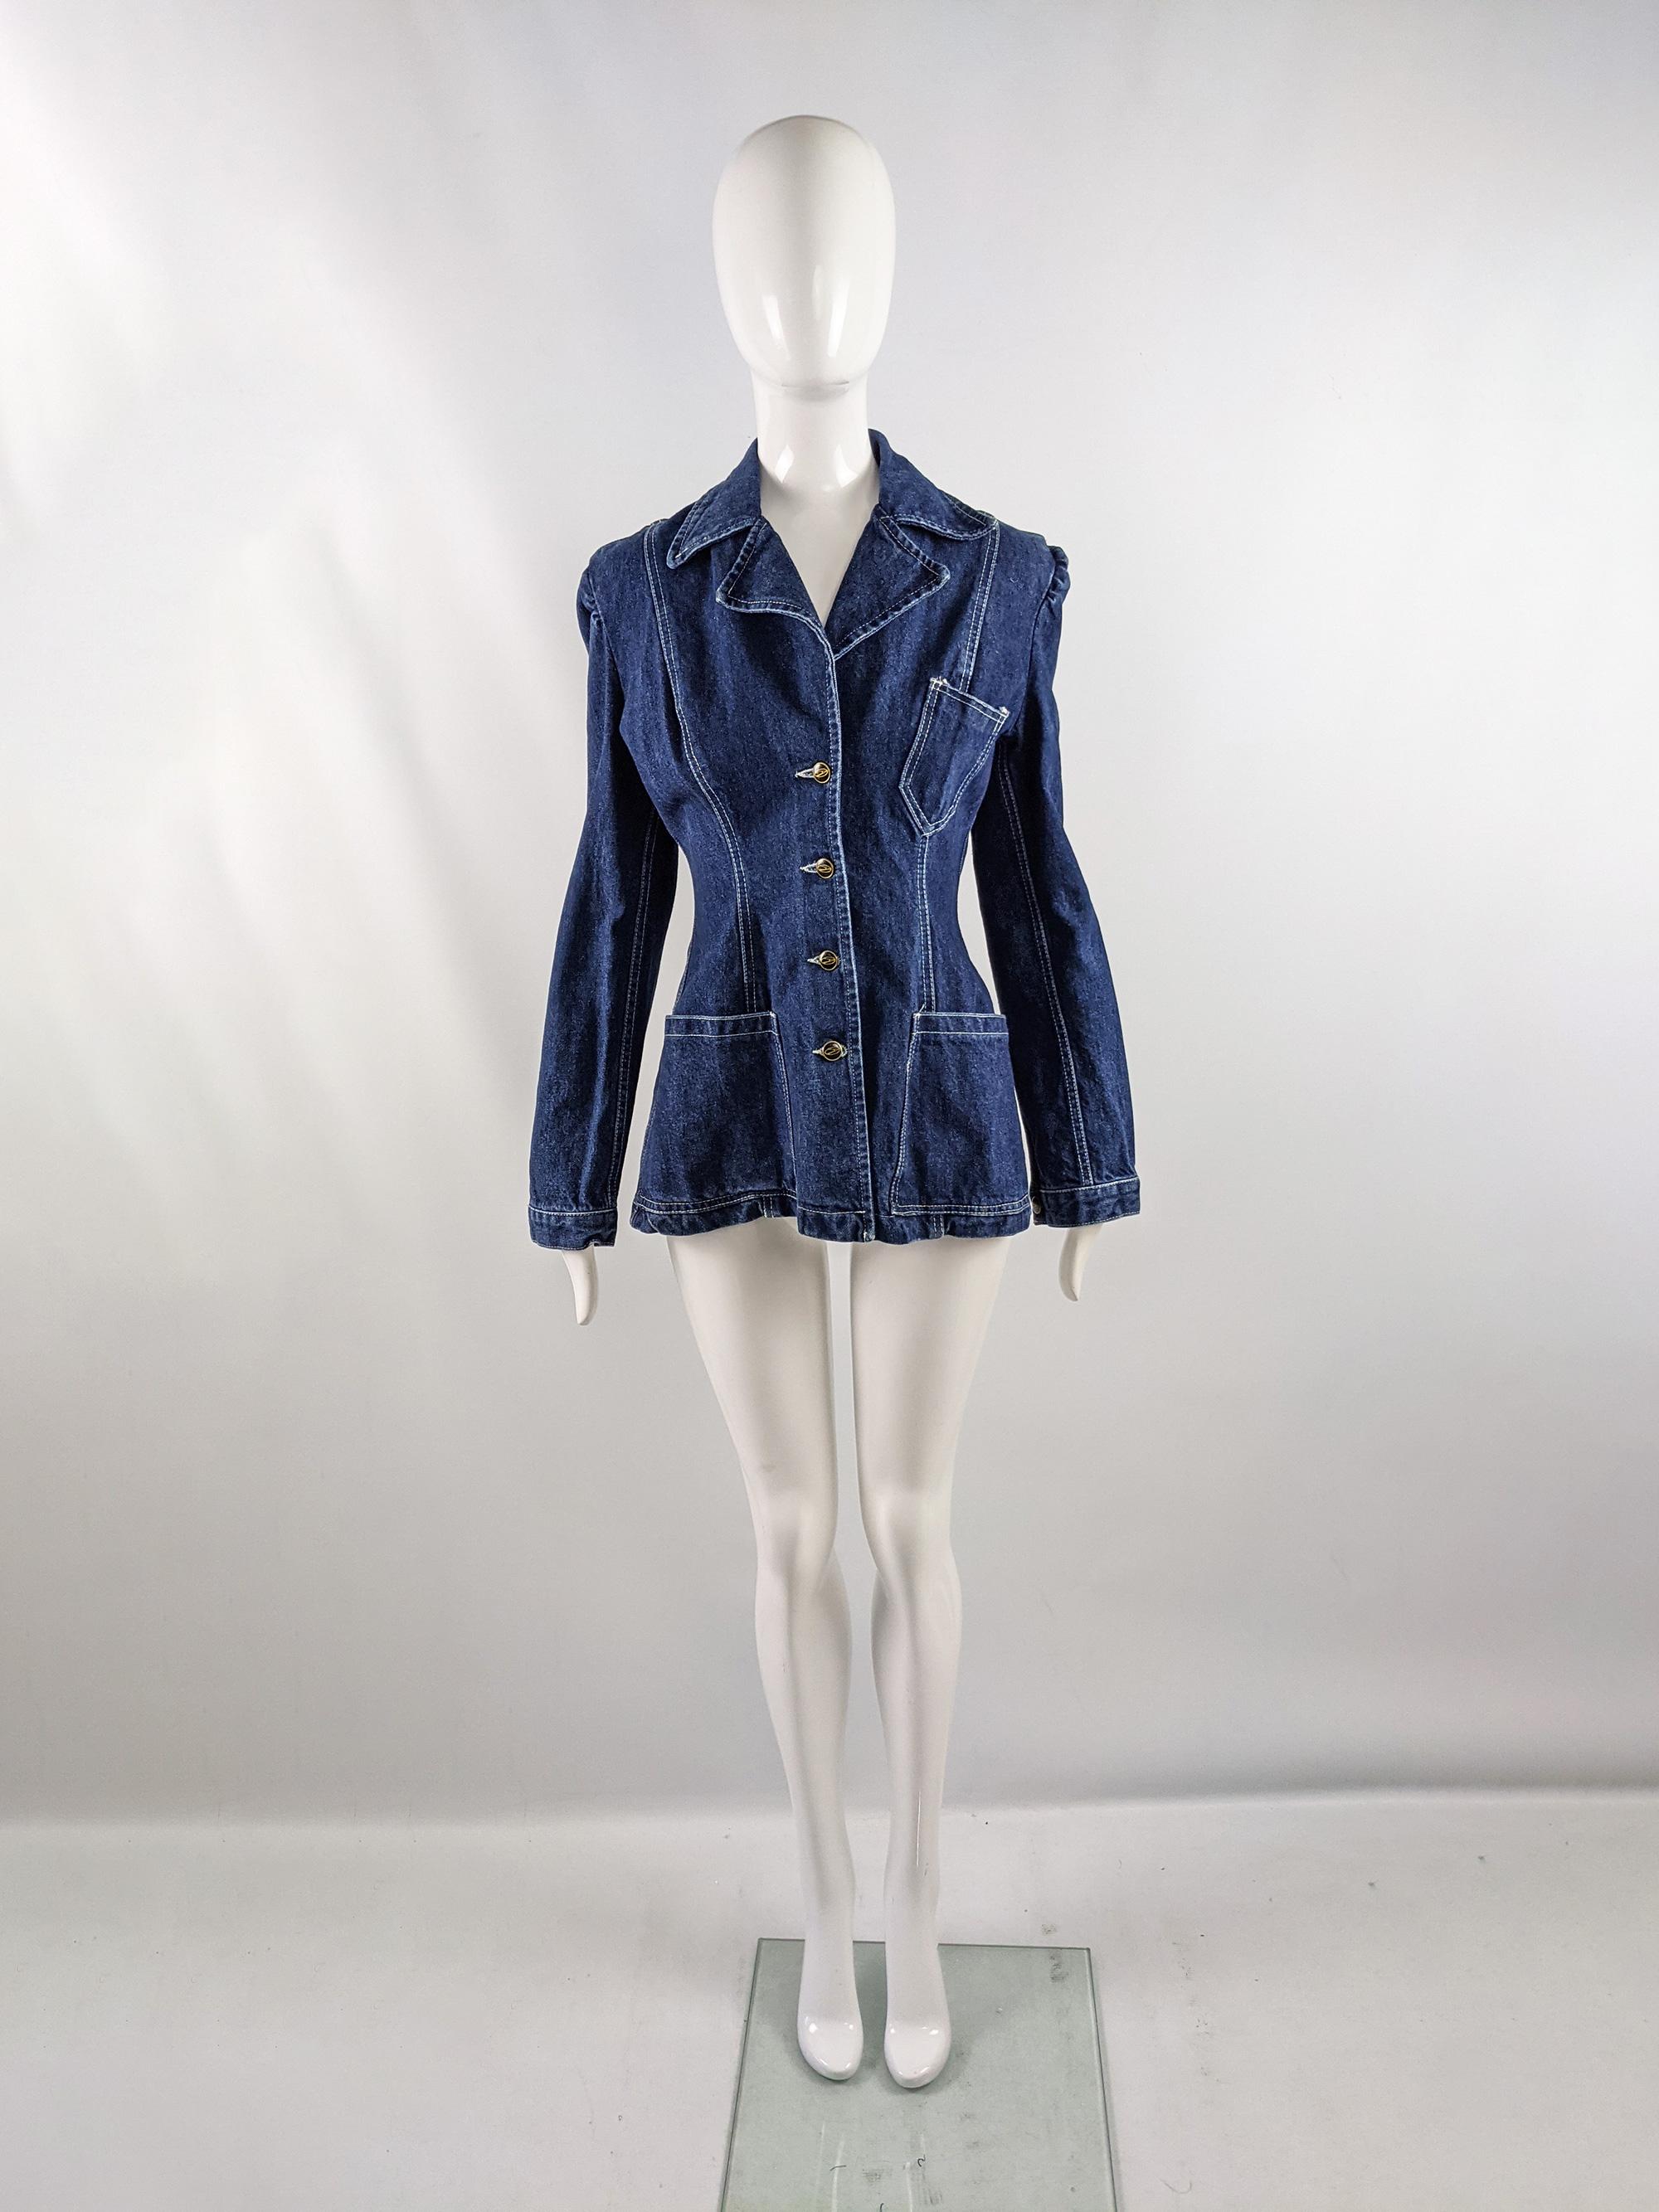 An excellent vintage womens denim jacket from the 90s by luxury British fashion designer, John Richmond for his cult label, Destroy. In a dark blue denim with a tailored, nipped waist which gives an hourglass silhouette and a 70s style collar.